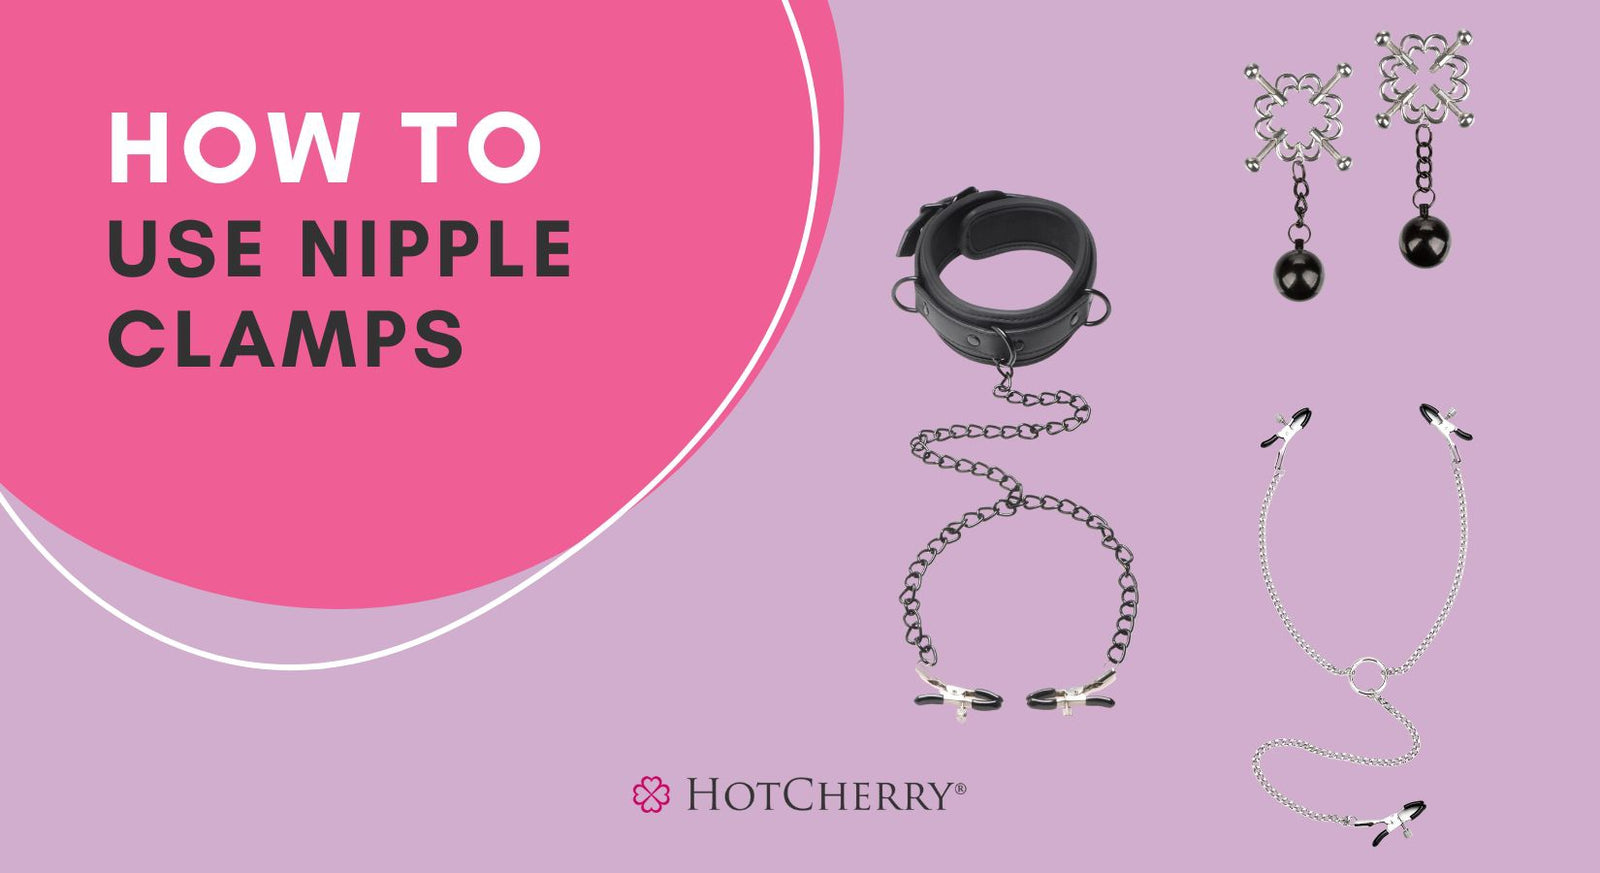 How to Use Nipple Clamps for Better Stimulation